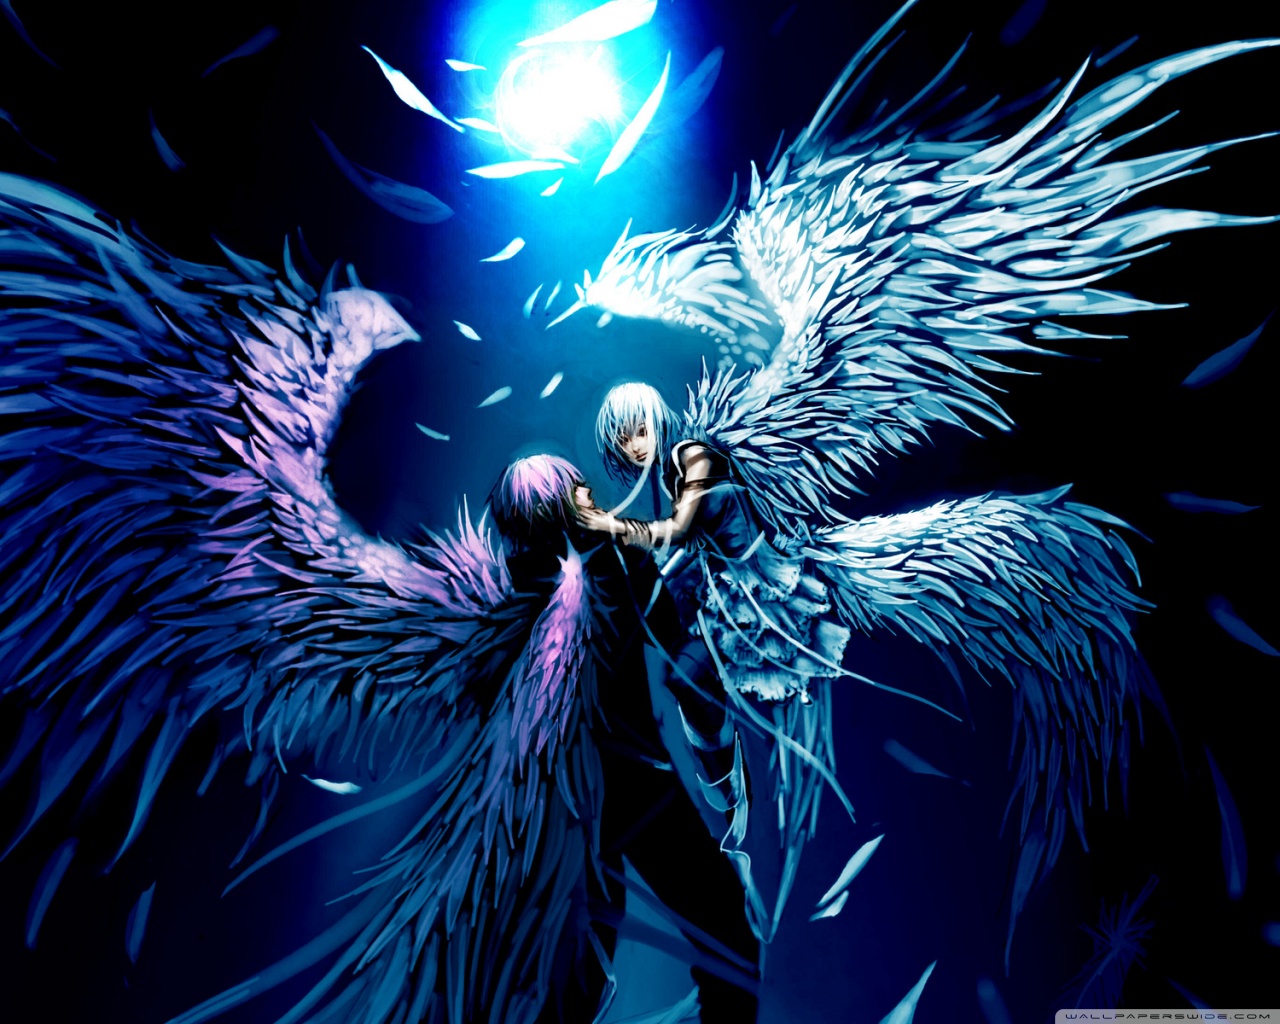 Two Angels In Love - 1280x1024 Wallpaper 